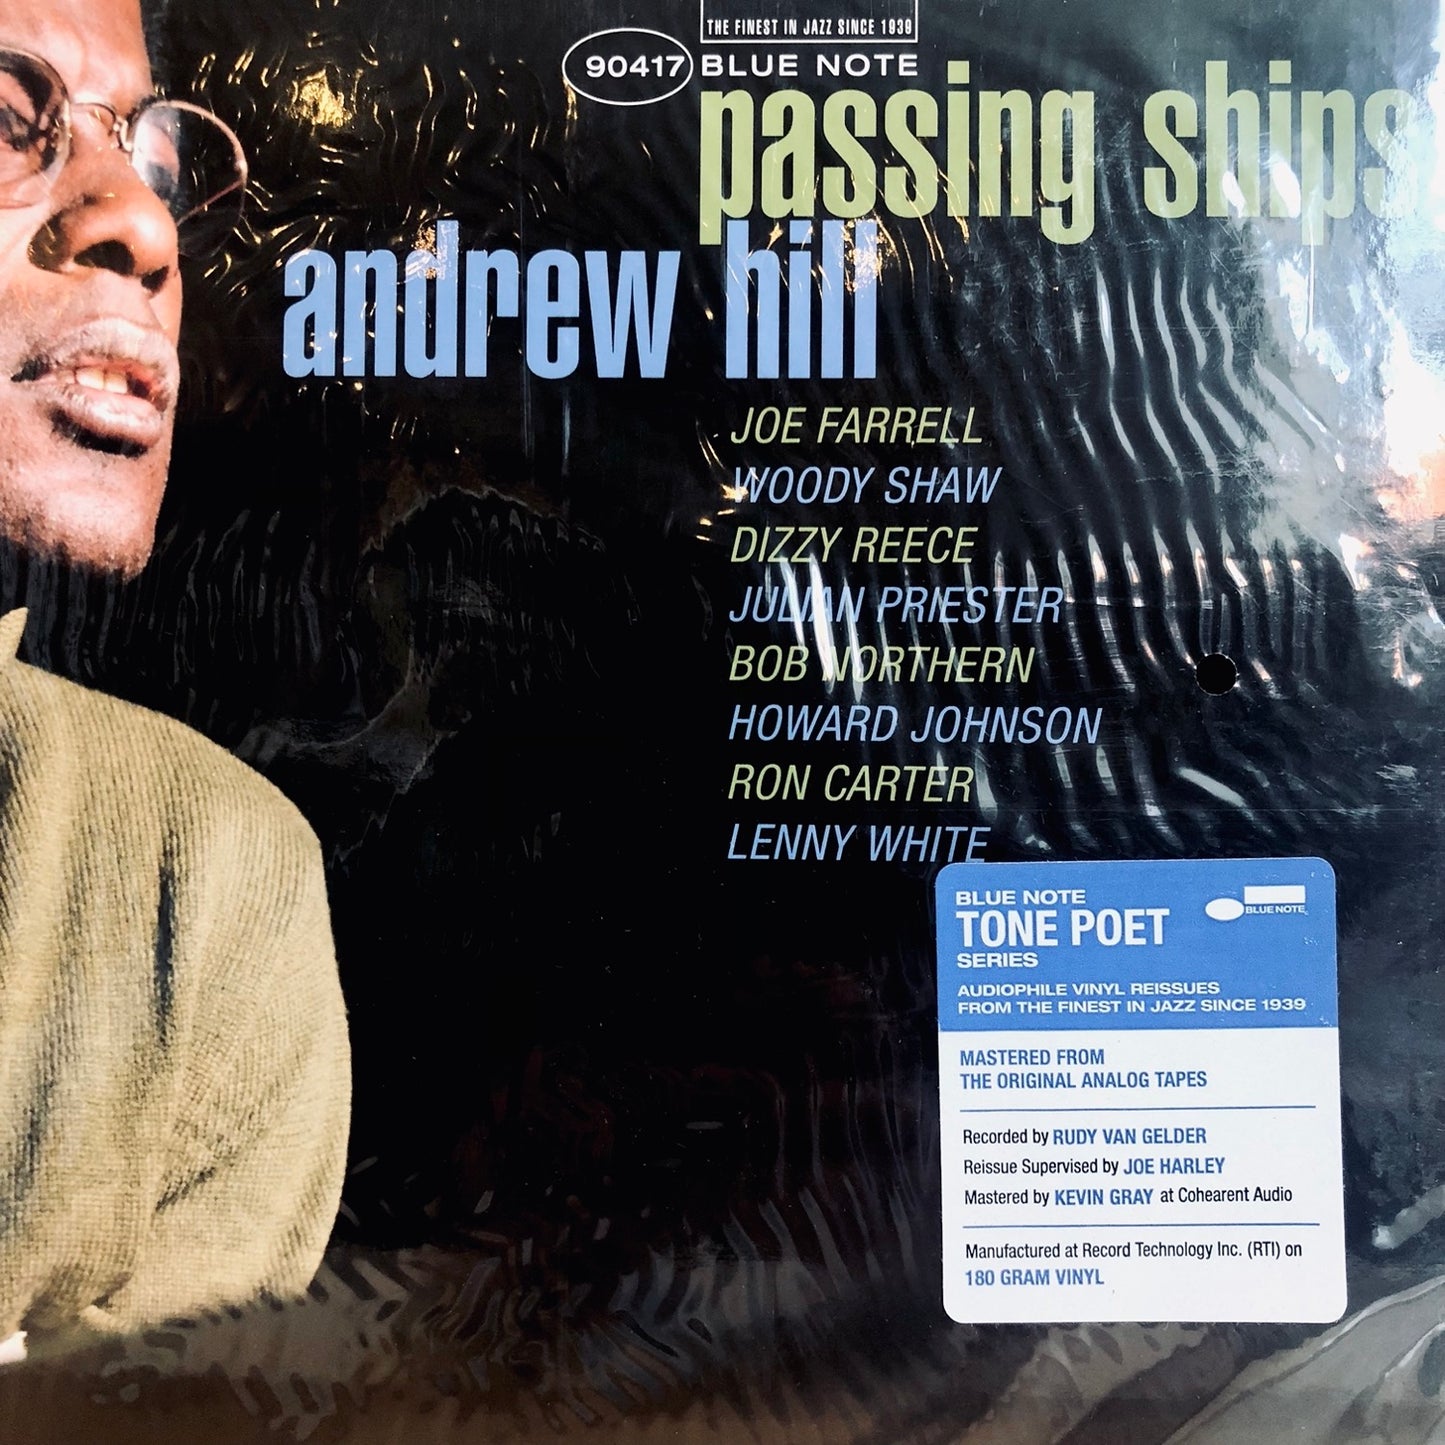 Andrew Hill - Passing Ships. 2LP (Blue Note Tone Poet Series)